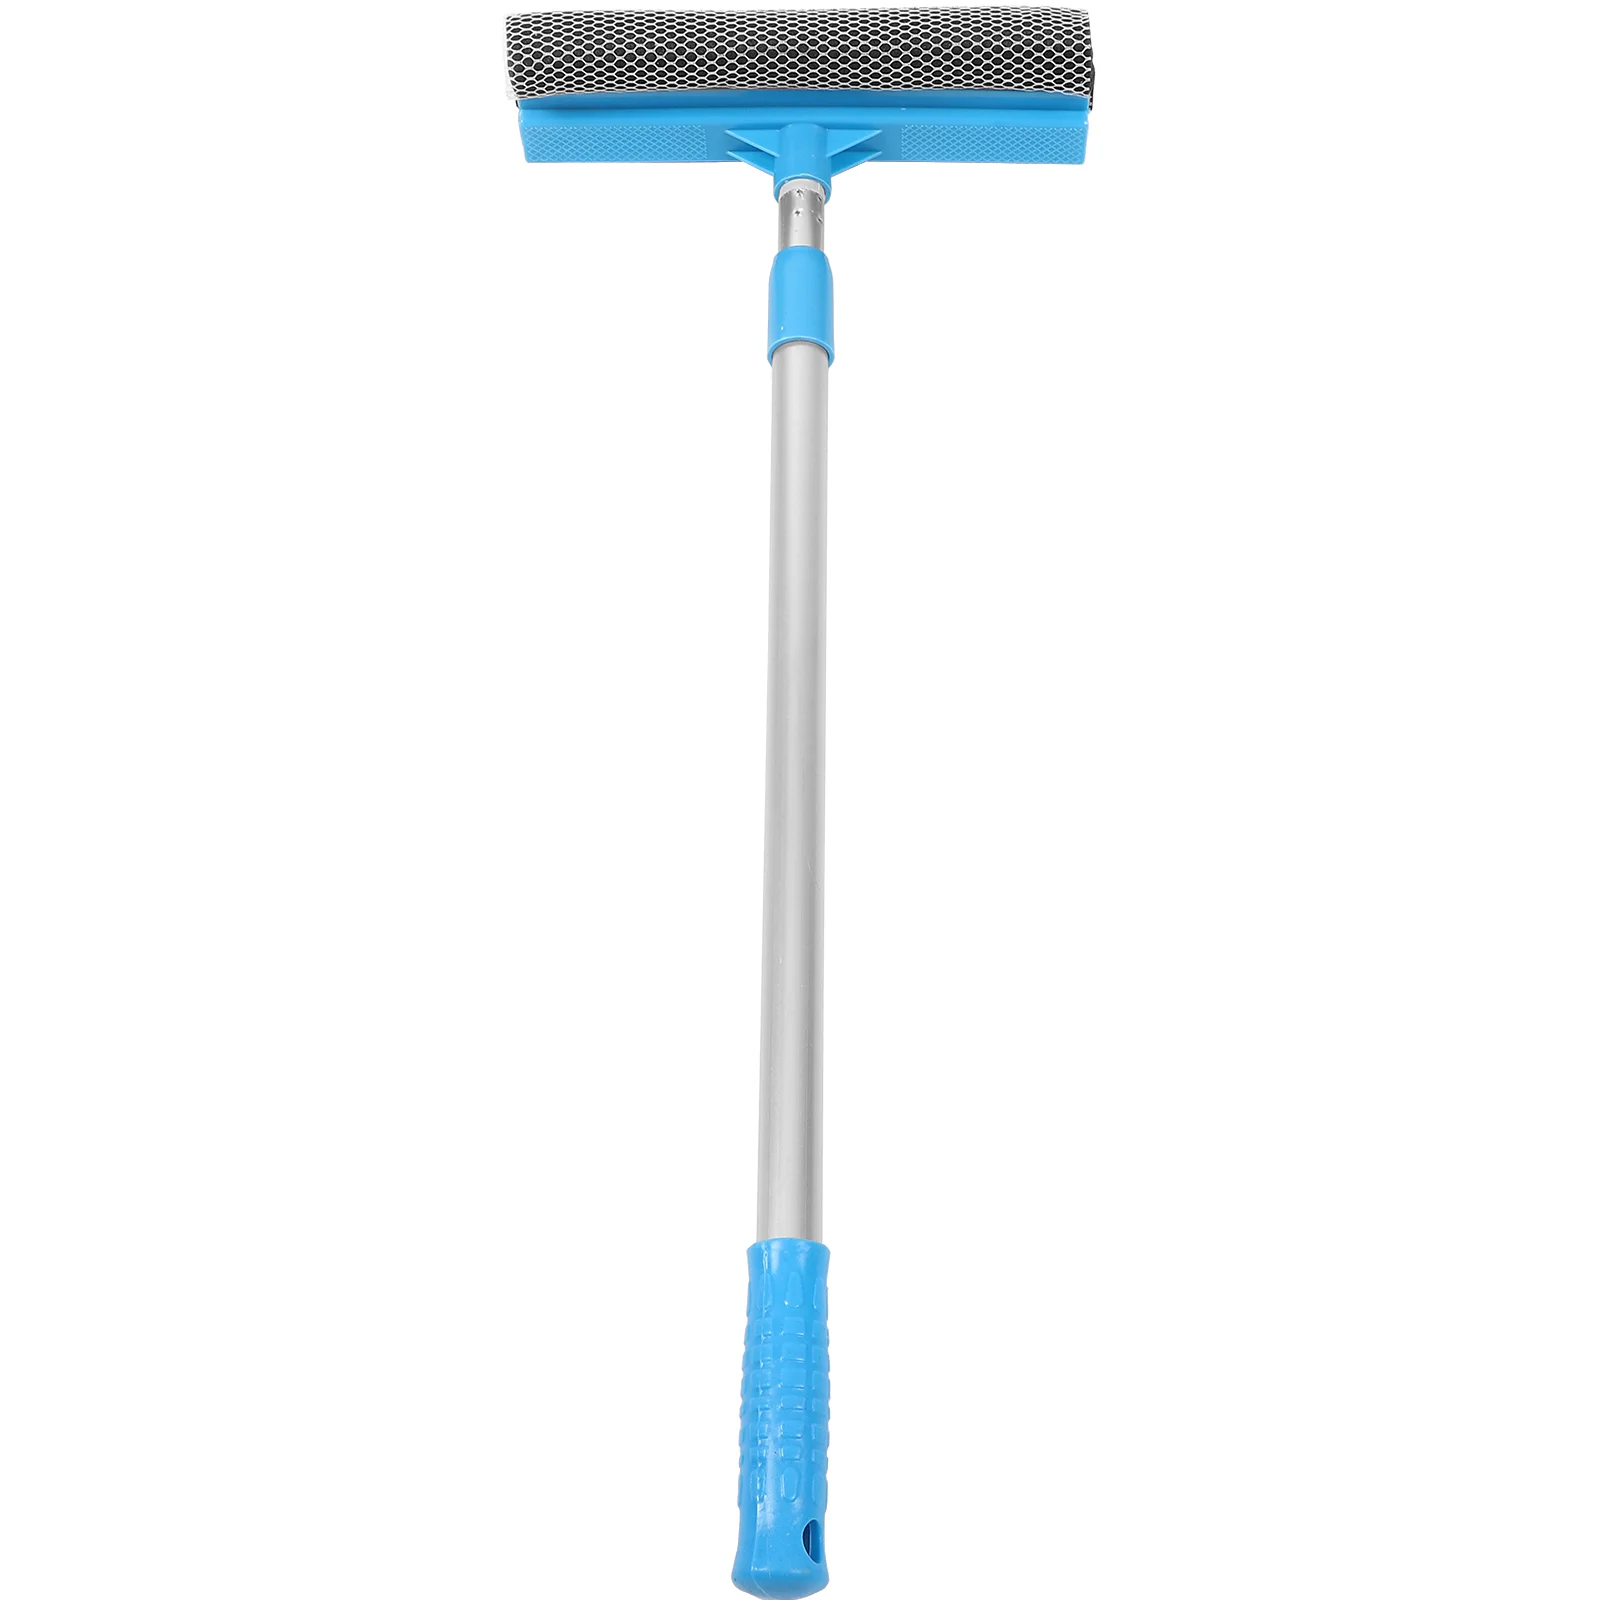 

Window Cleaner Squeegee Mirror Washing Wiper Tile Wall Scrubber Glass Shower Door Double-sided Windows Scraper for Cleaning